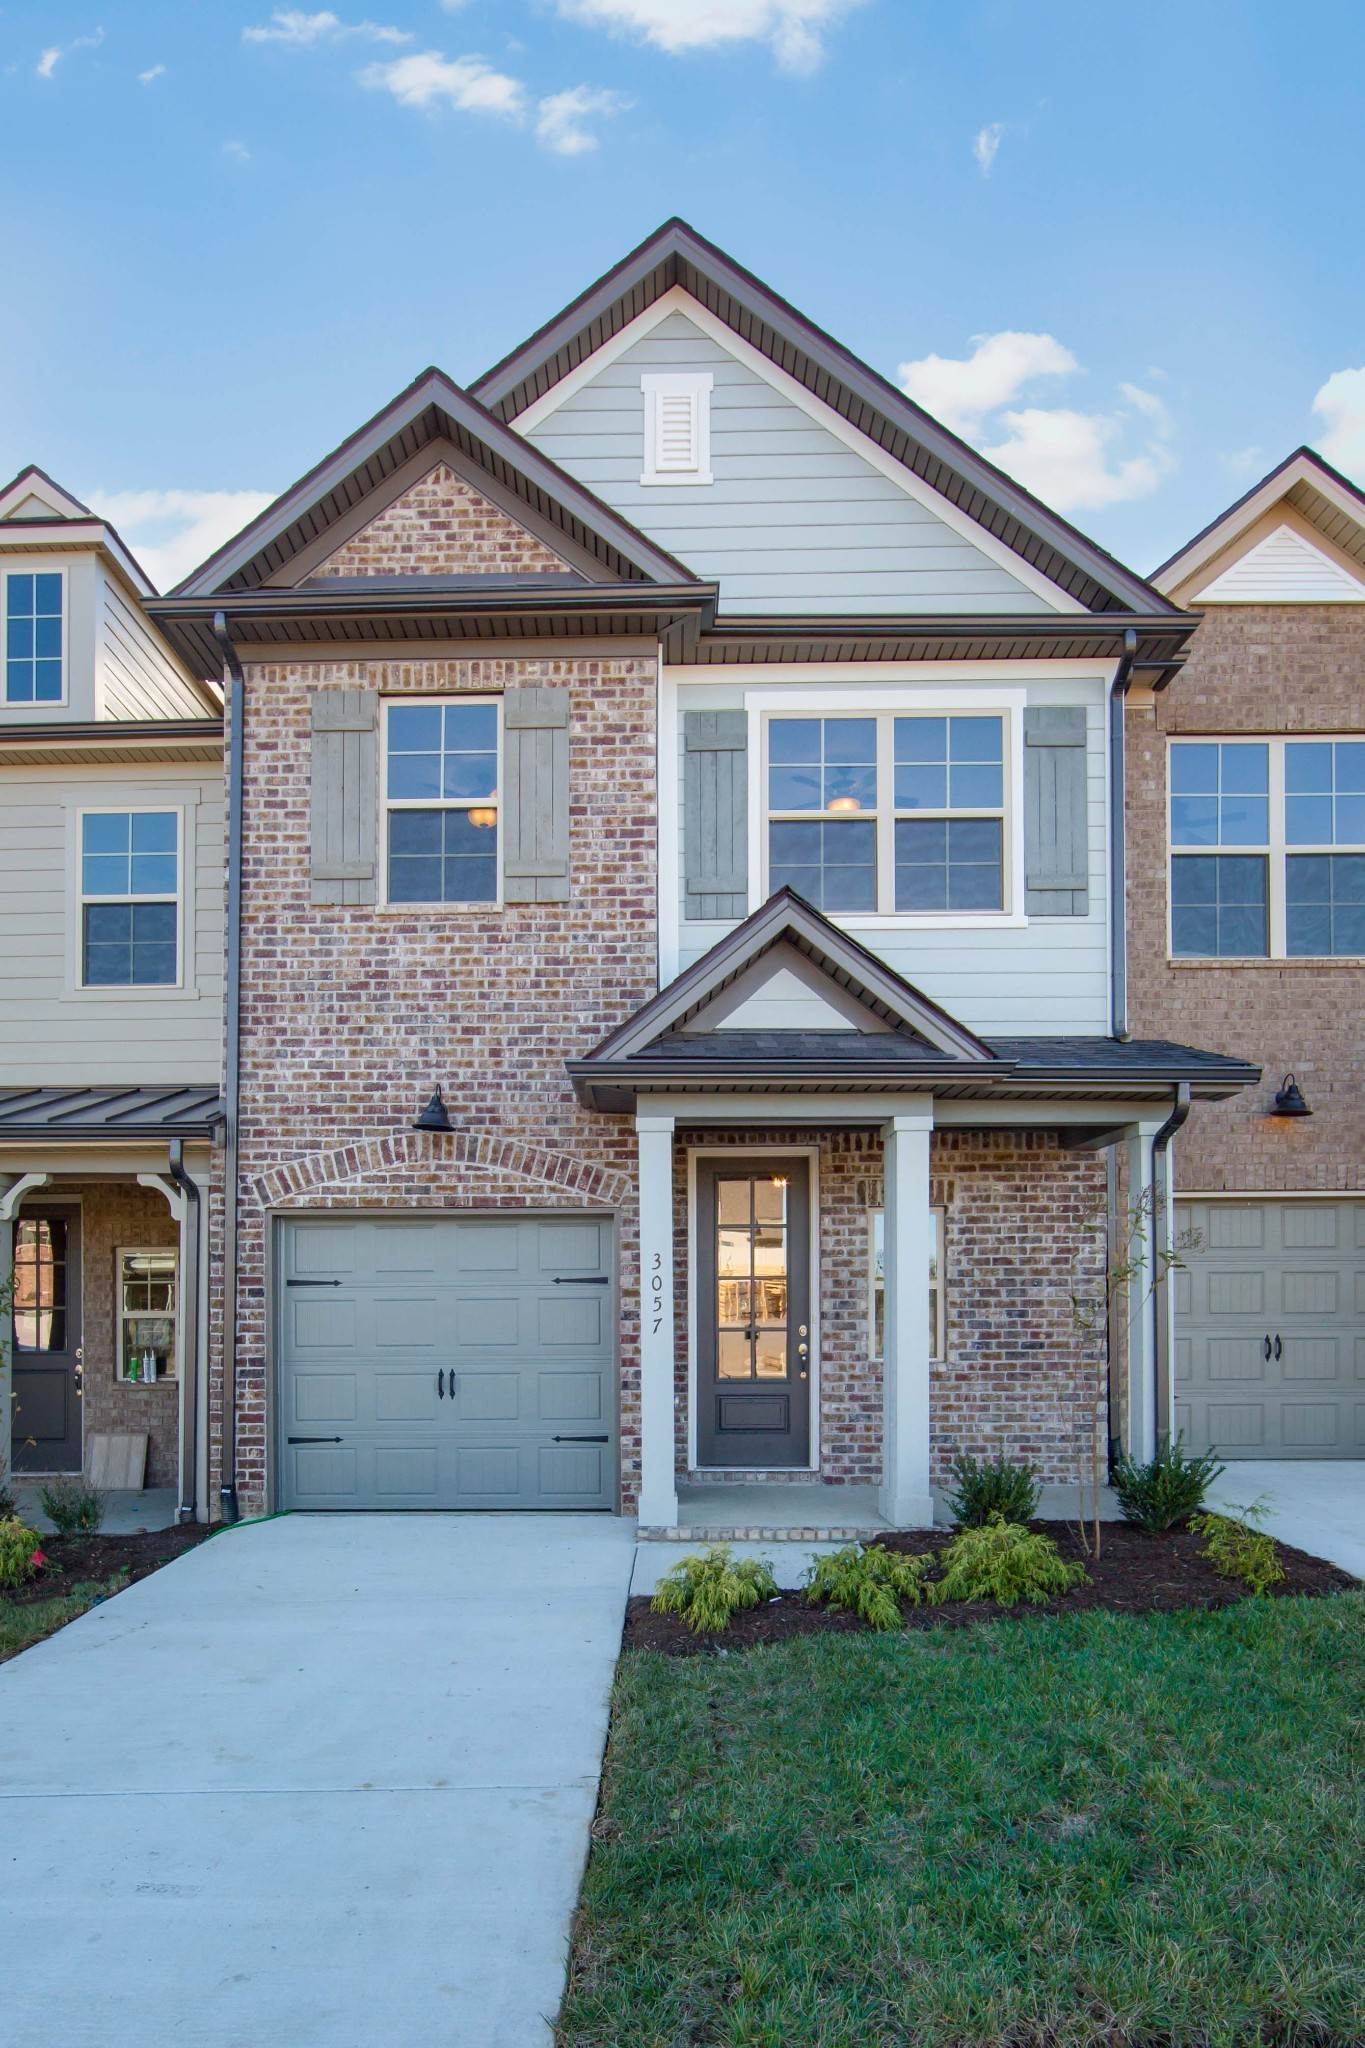 Townhouse at 3149 Sassafras Ln - Lot 1231 Thompsons Station, Tennessee 37179 United States